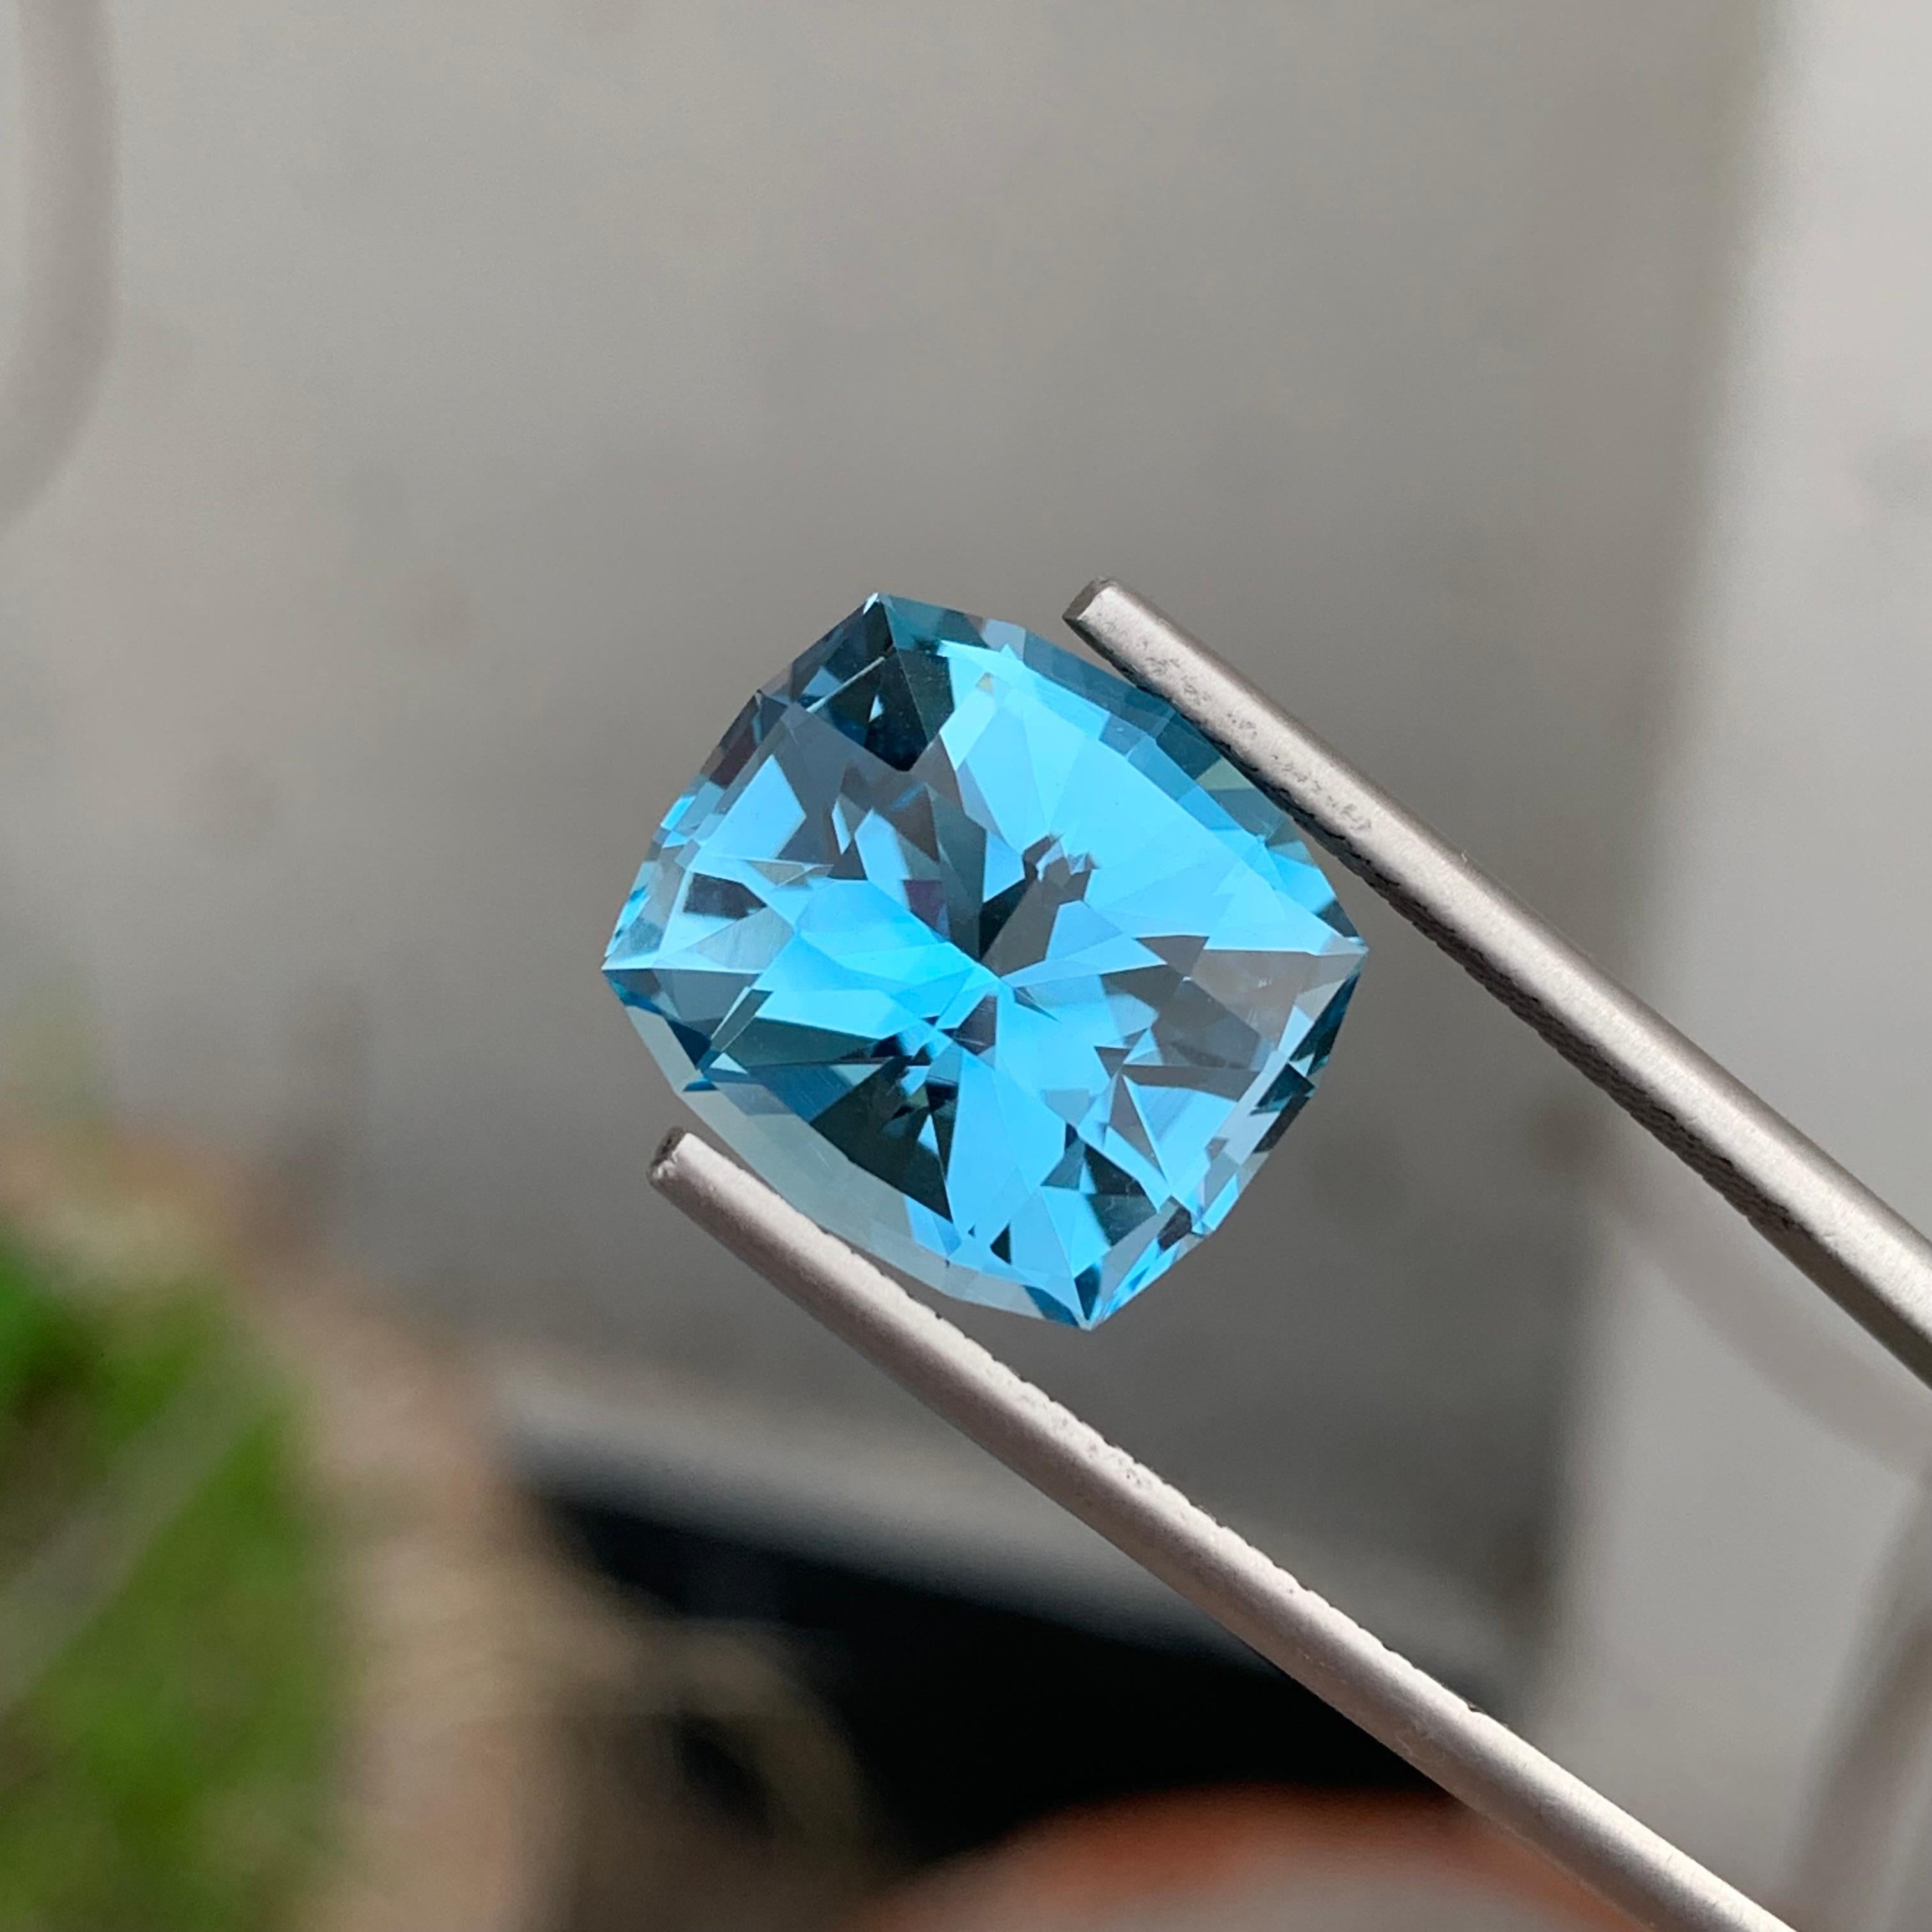 12.15 Carat Fancy Cut Faceted Sky Blue Topaz Gemstone For Jewellery Making  For Sale 4